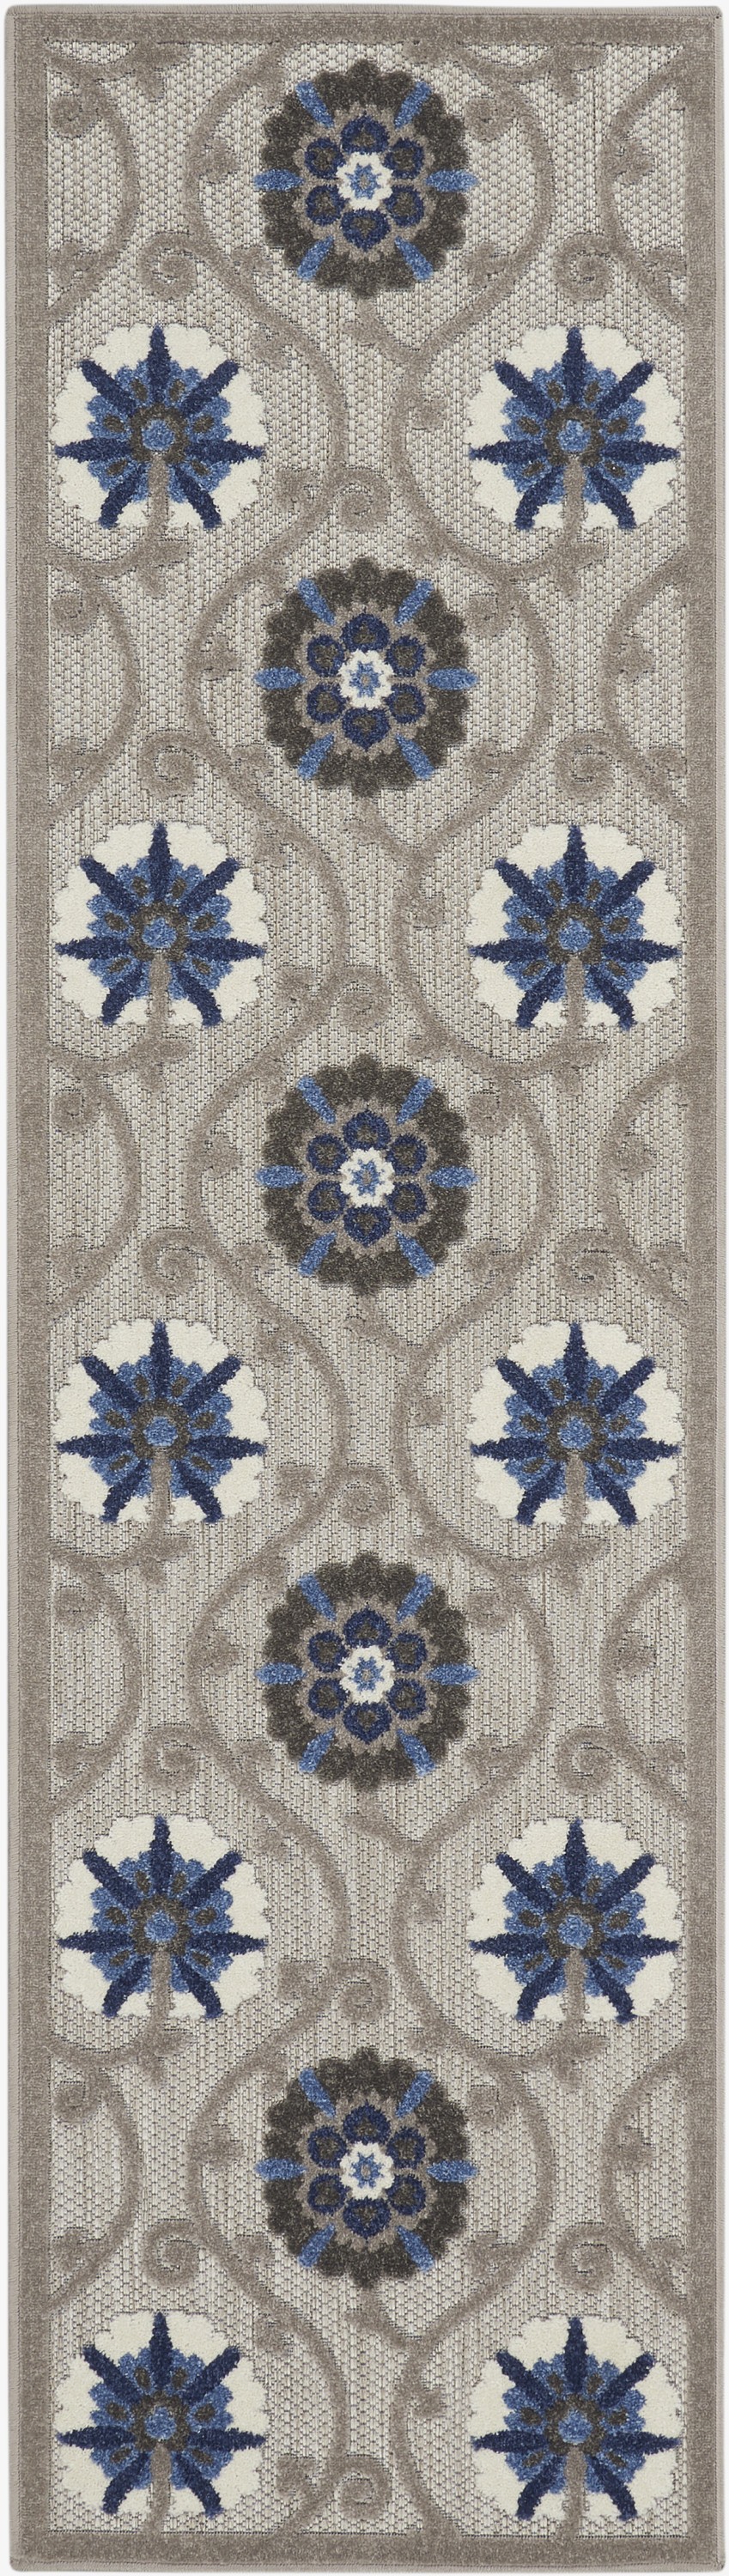 2' X 10' Blue And Gray Floral Indoor Outdoor Area Rug-384981-1